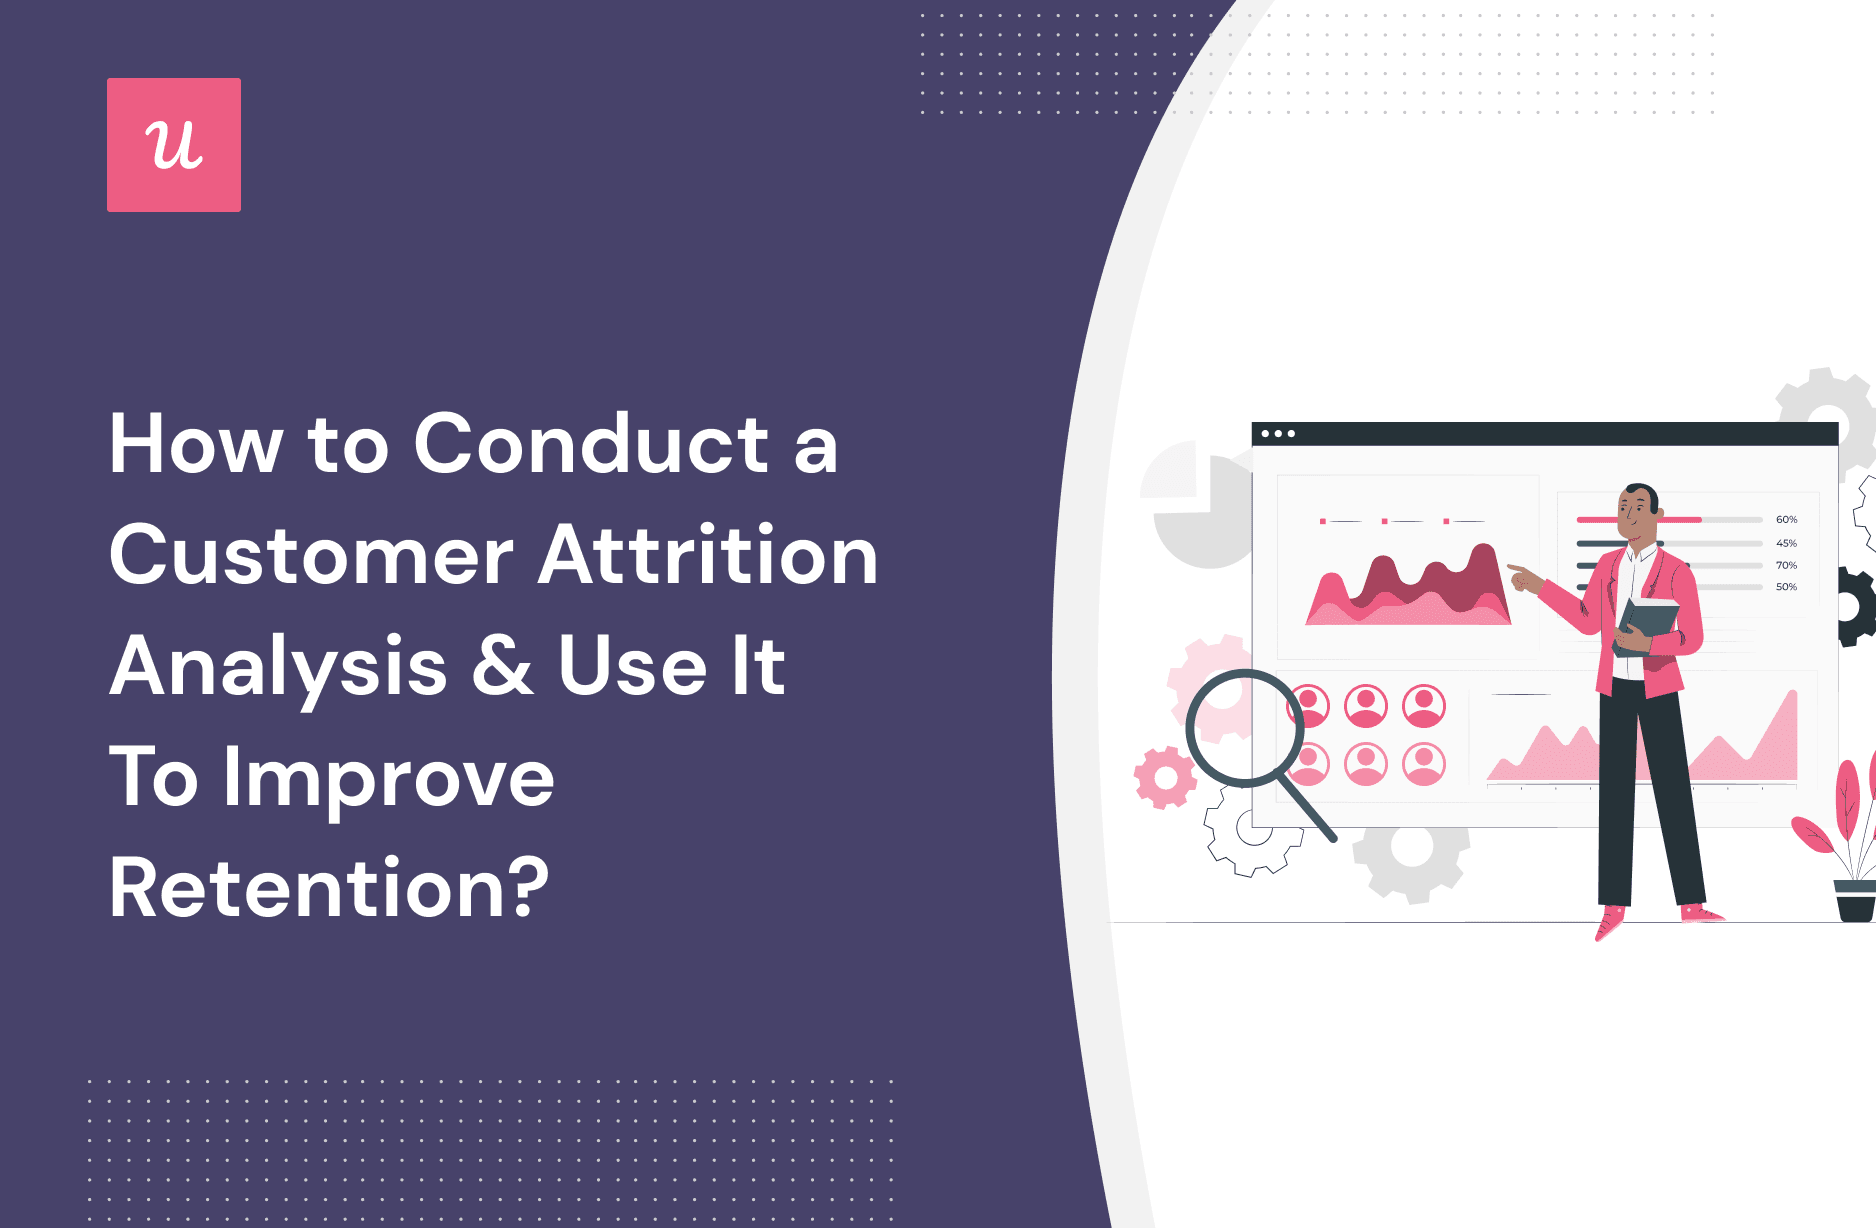 How To Conduct a Customer Attrition Analysis & Use It To Improve Retention? cover